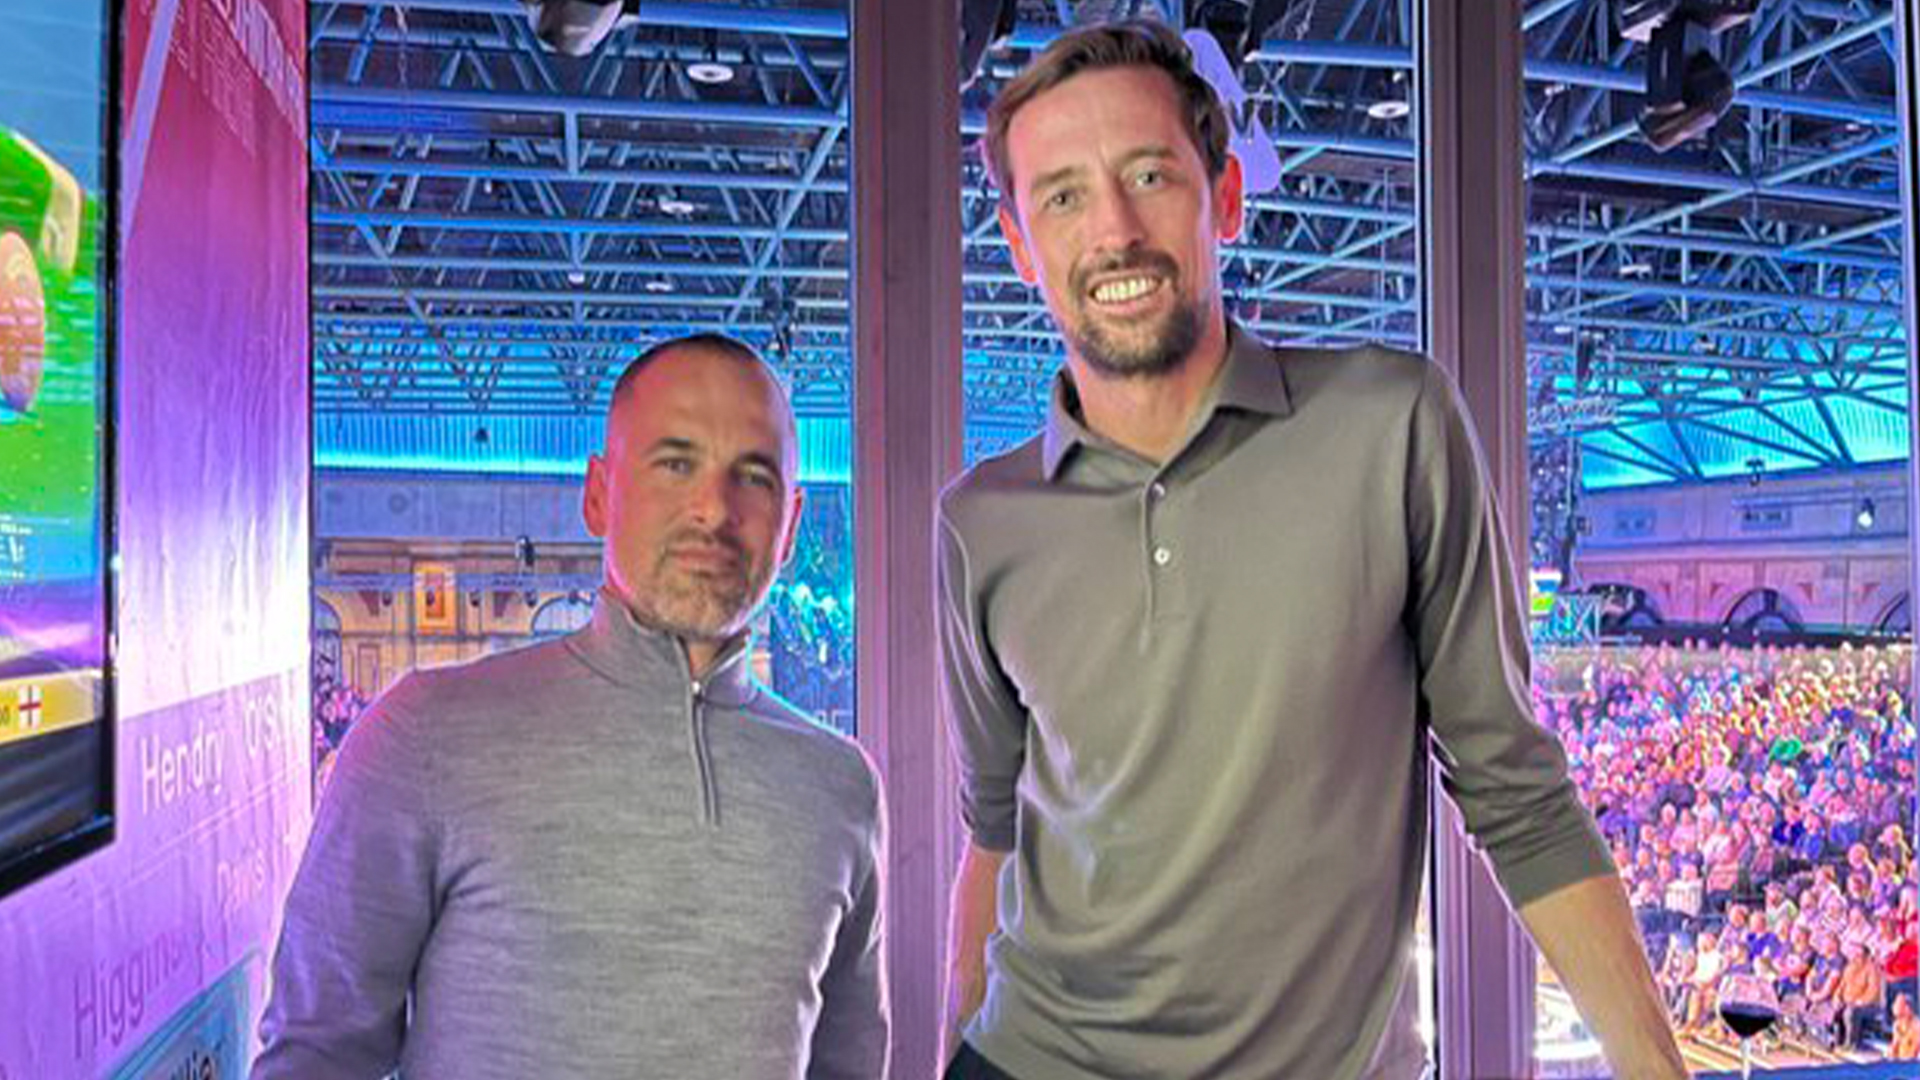 Joe Cole and Peter Crouch given hilarious new nickname as England legends spotted at snooker Masters